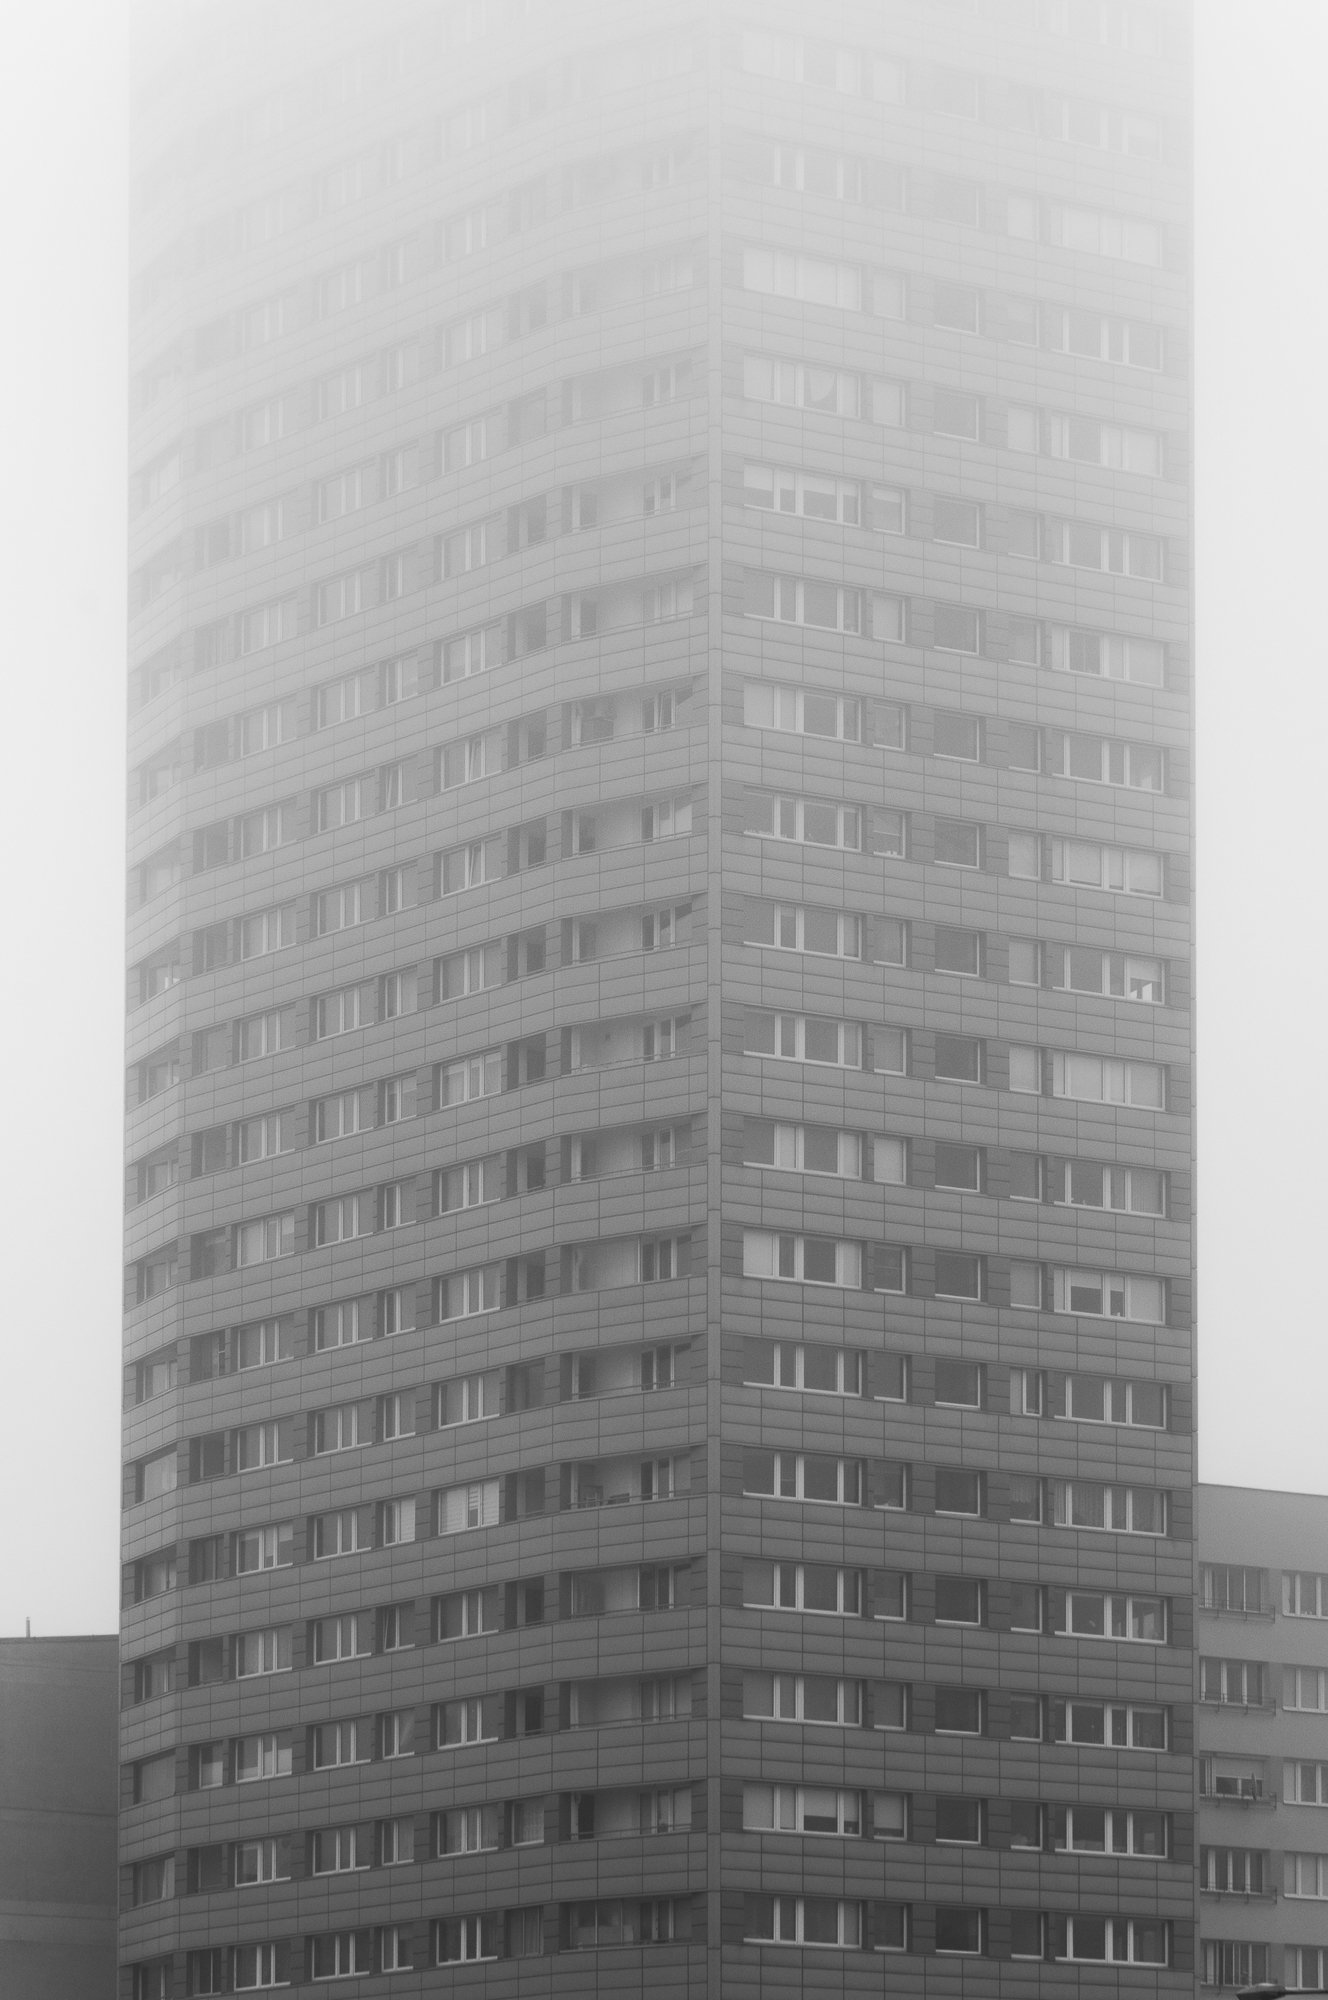 Adam Mazek Photography Warsaw 2017. The tower. Perspective. Smog in Warsaw.